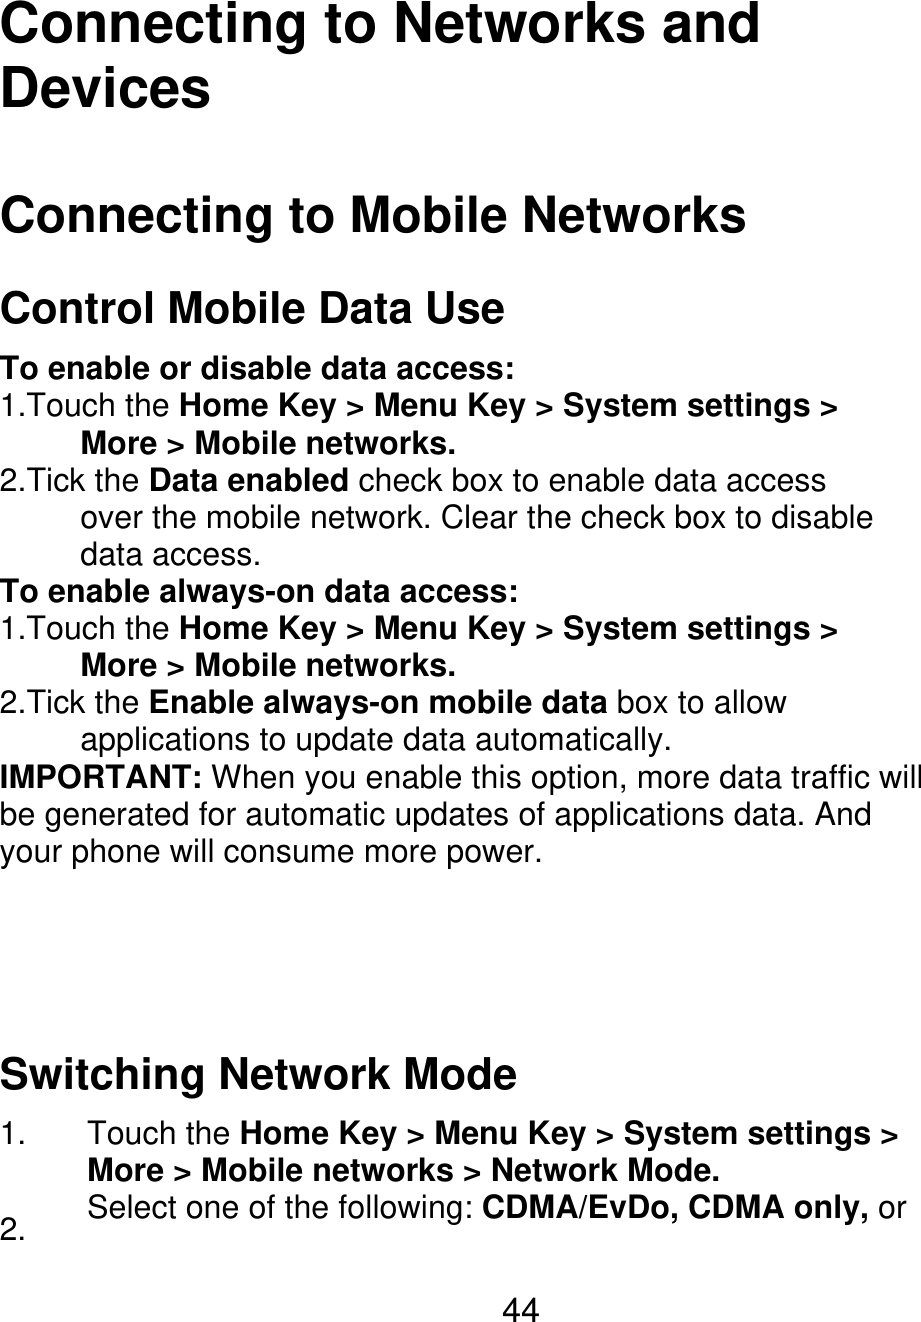 Connecting to Networks and Devices Connecting to Mobile Networks Control Mobile Data Use To enable or disable data access: 1.Touch the Home Key &gt; Menu Key &gt; System settings &gt;      More &gt; Mobile networks. 2.Tick the Data enabled check box to enable data access           over the mobile network. Clear the check box to disable      data access. To enable always-on data access: 1.Touch the Home Key &gt; Menu Key &gt; System settings &gt;      More &gt; Mobile networks. 2.Tick the Enable always-on mobile data box to allow      applications to update data automatically. IMPORTANT: When you enable this option, more data traffic will be generated for automatic updates of applications data. And your phone will consume more power. Switching Network Mode 1. 2. Touch the Home Key &gt; Menu Key &gt; System settings &gt; More &gt; Mobile networks &gt; Network Mode. Select one of the following: CDMA/EvDo, CDMA only, or 44 